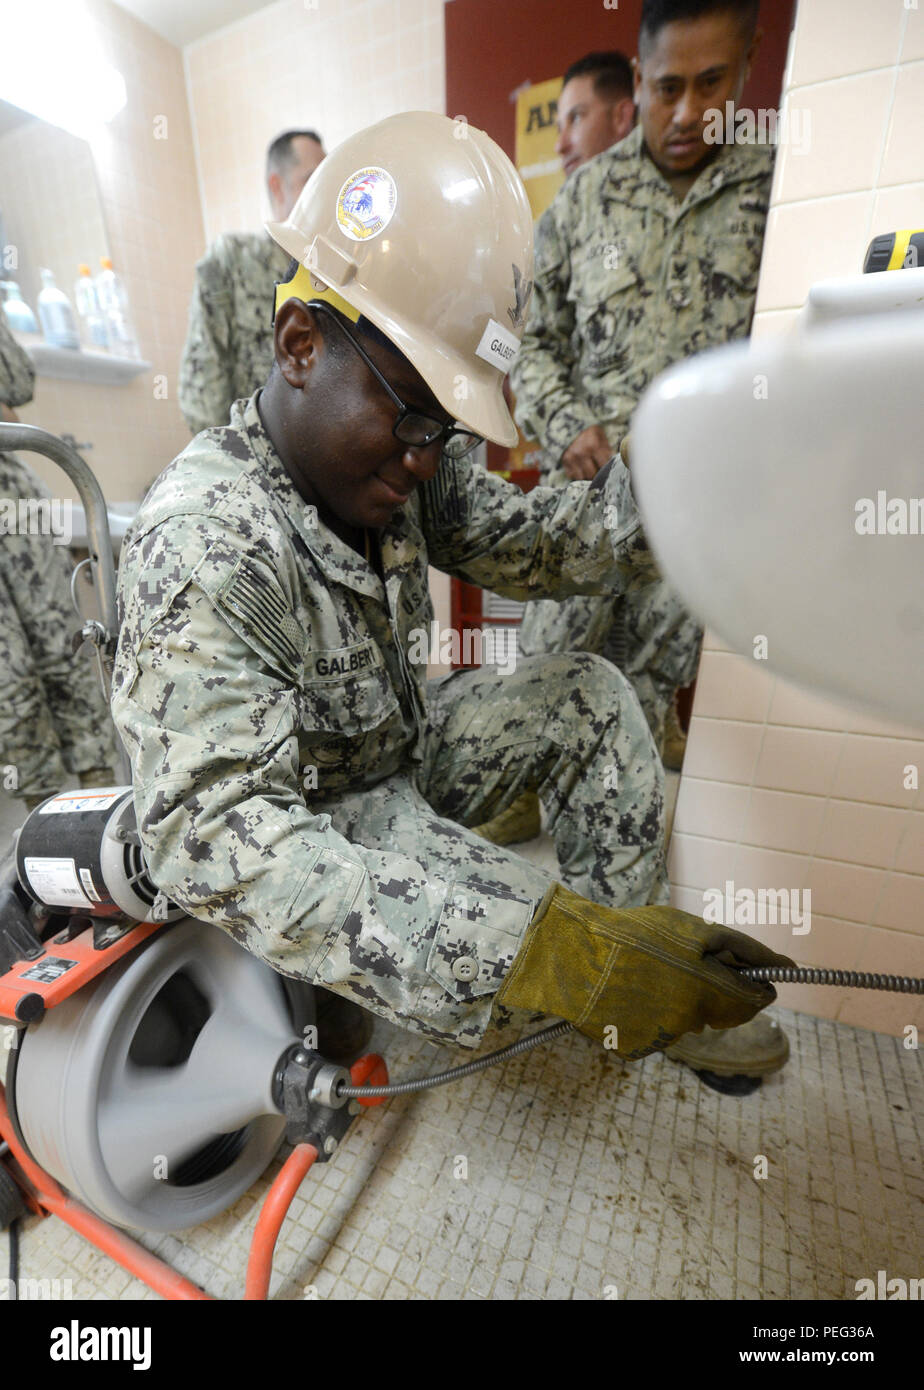 150818-N-SD120-006 OKINAWA, Japan (Aug. 18, 2015) Utilitiesman 3rd Class Kevin Galbert, from Wichita, Kan., uses an electric auger, commonly referred to as a plumbing snake, to clear a clogged drain in Naval Mobile Construction Battalion (NMCB) 5’s headquarters building on Camp Shields, Okinawa. NMCB 5 is currently deployed to Japan and several countries in the Pacific area of operations conducting construction operations and humanitarian assistance projects. (U.S. Navy photo by Mass Communication Specialist 1st Class John P. Curtis/Released) Stock Photo